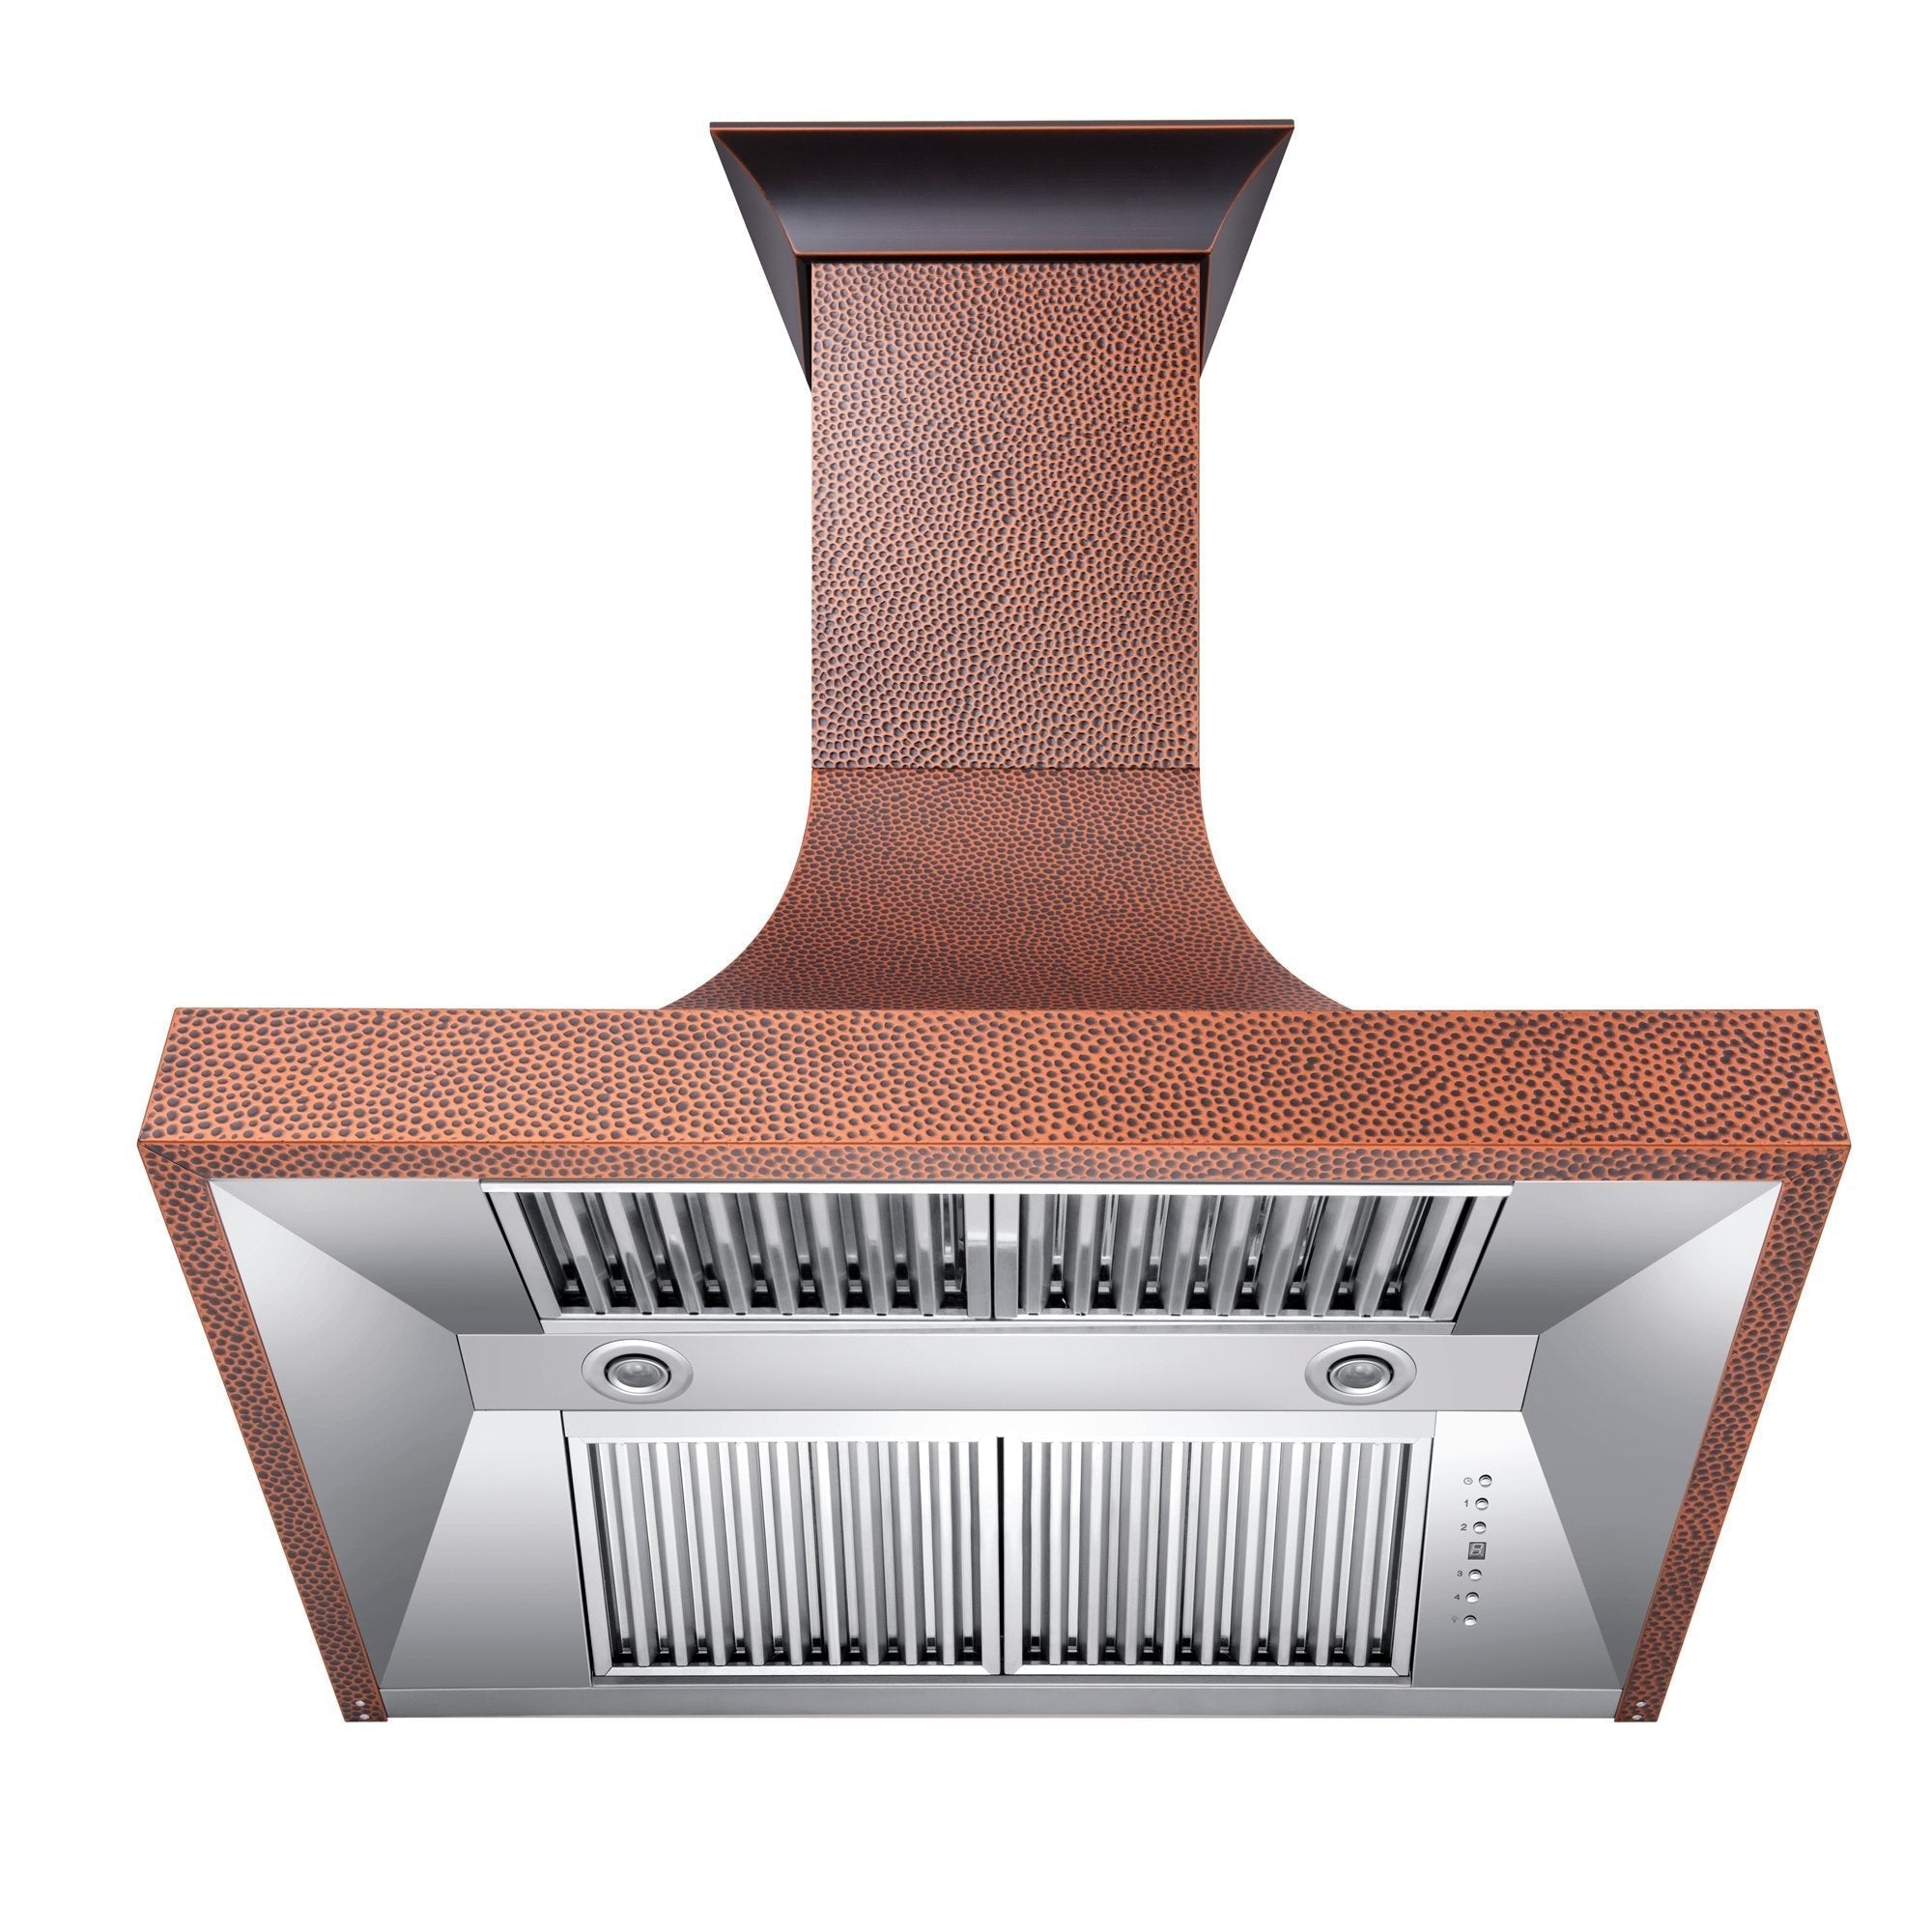 Under view of LED lighting and baffle filters of ZLINE Designer Series Hand-Hammered Copper Finish Wall Mount Range Hood (8632H)